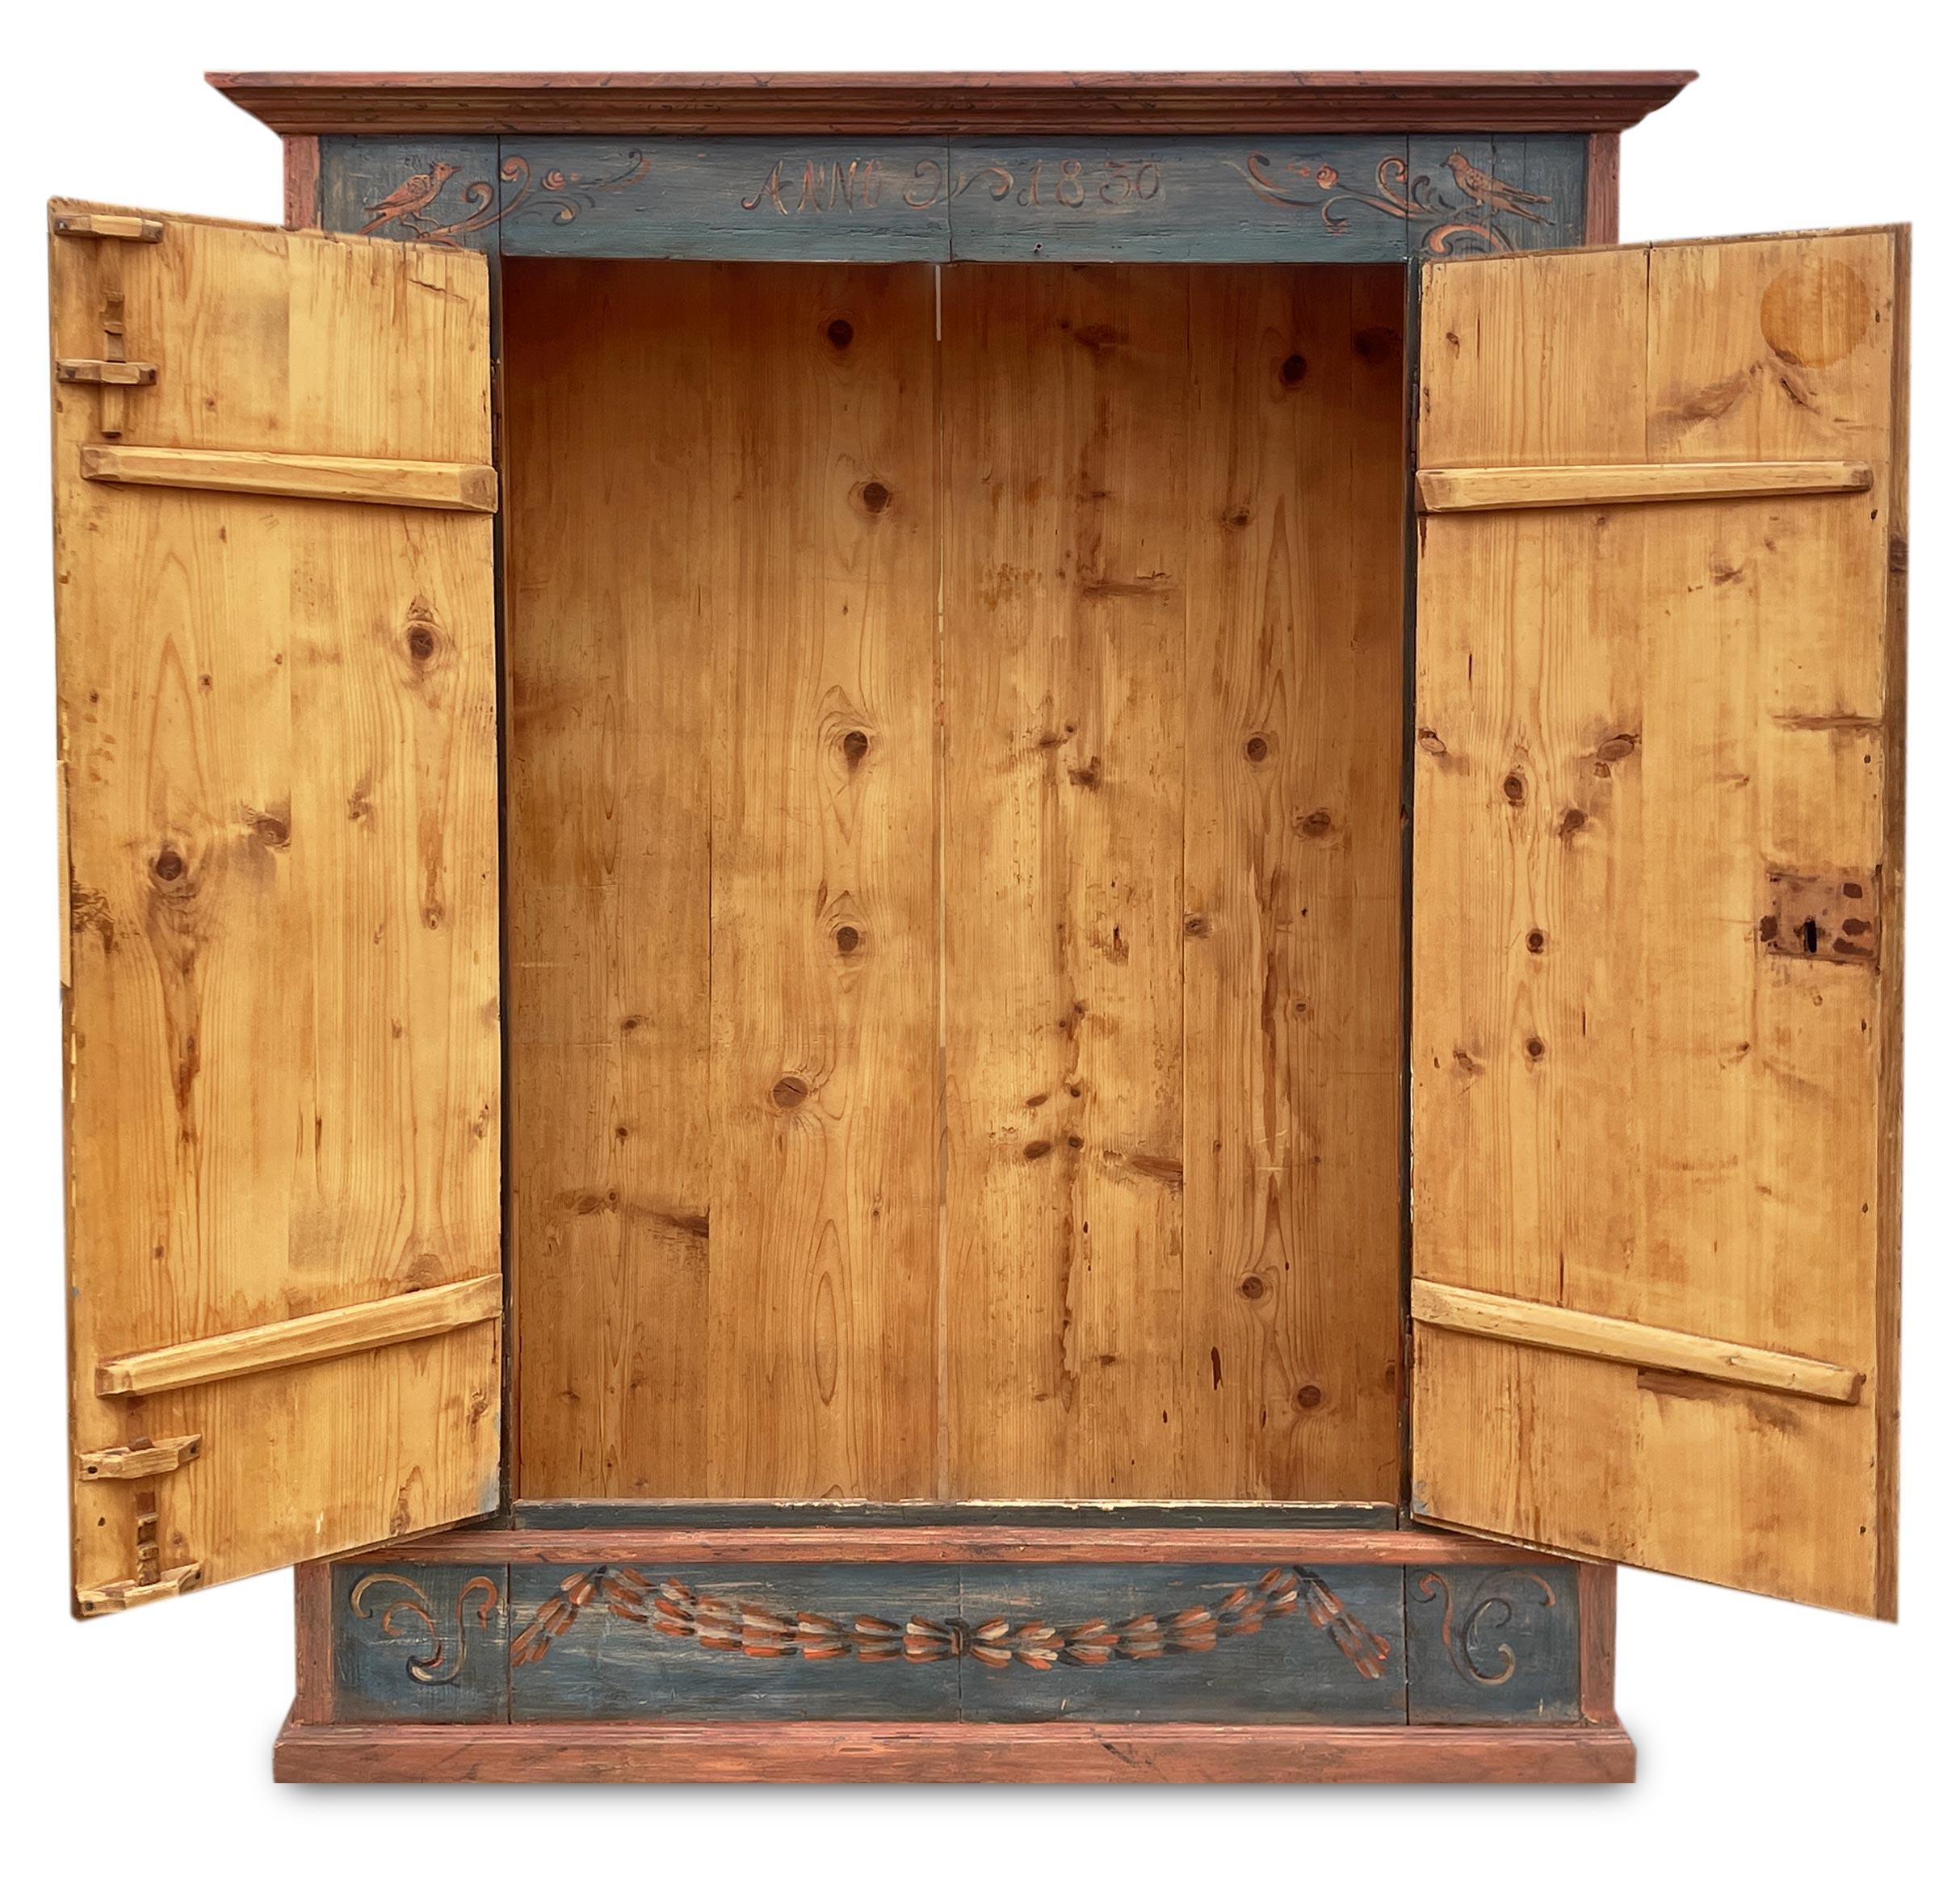 Rustic 1830 Blue Floral Painted Two Doors Cabin Wardrobe For Sale